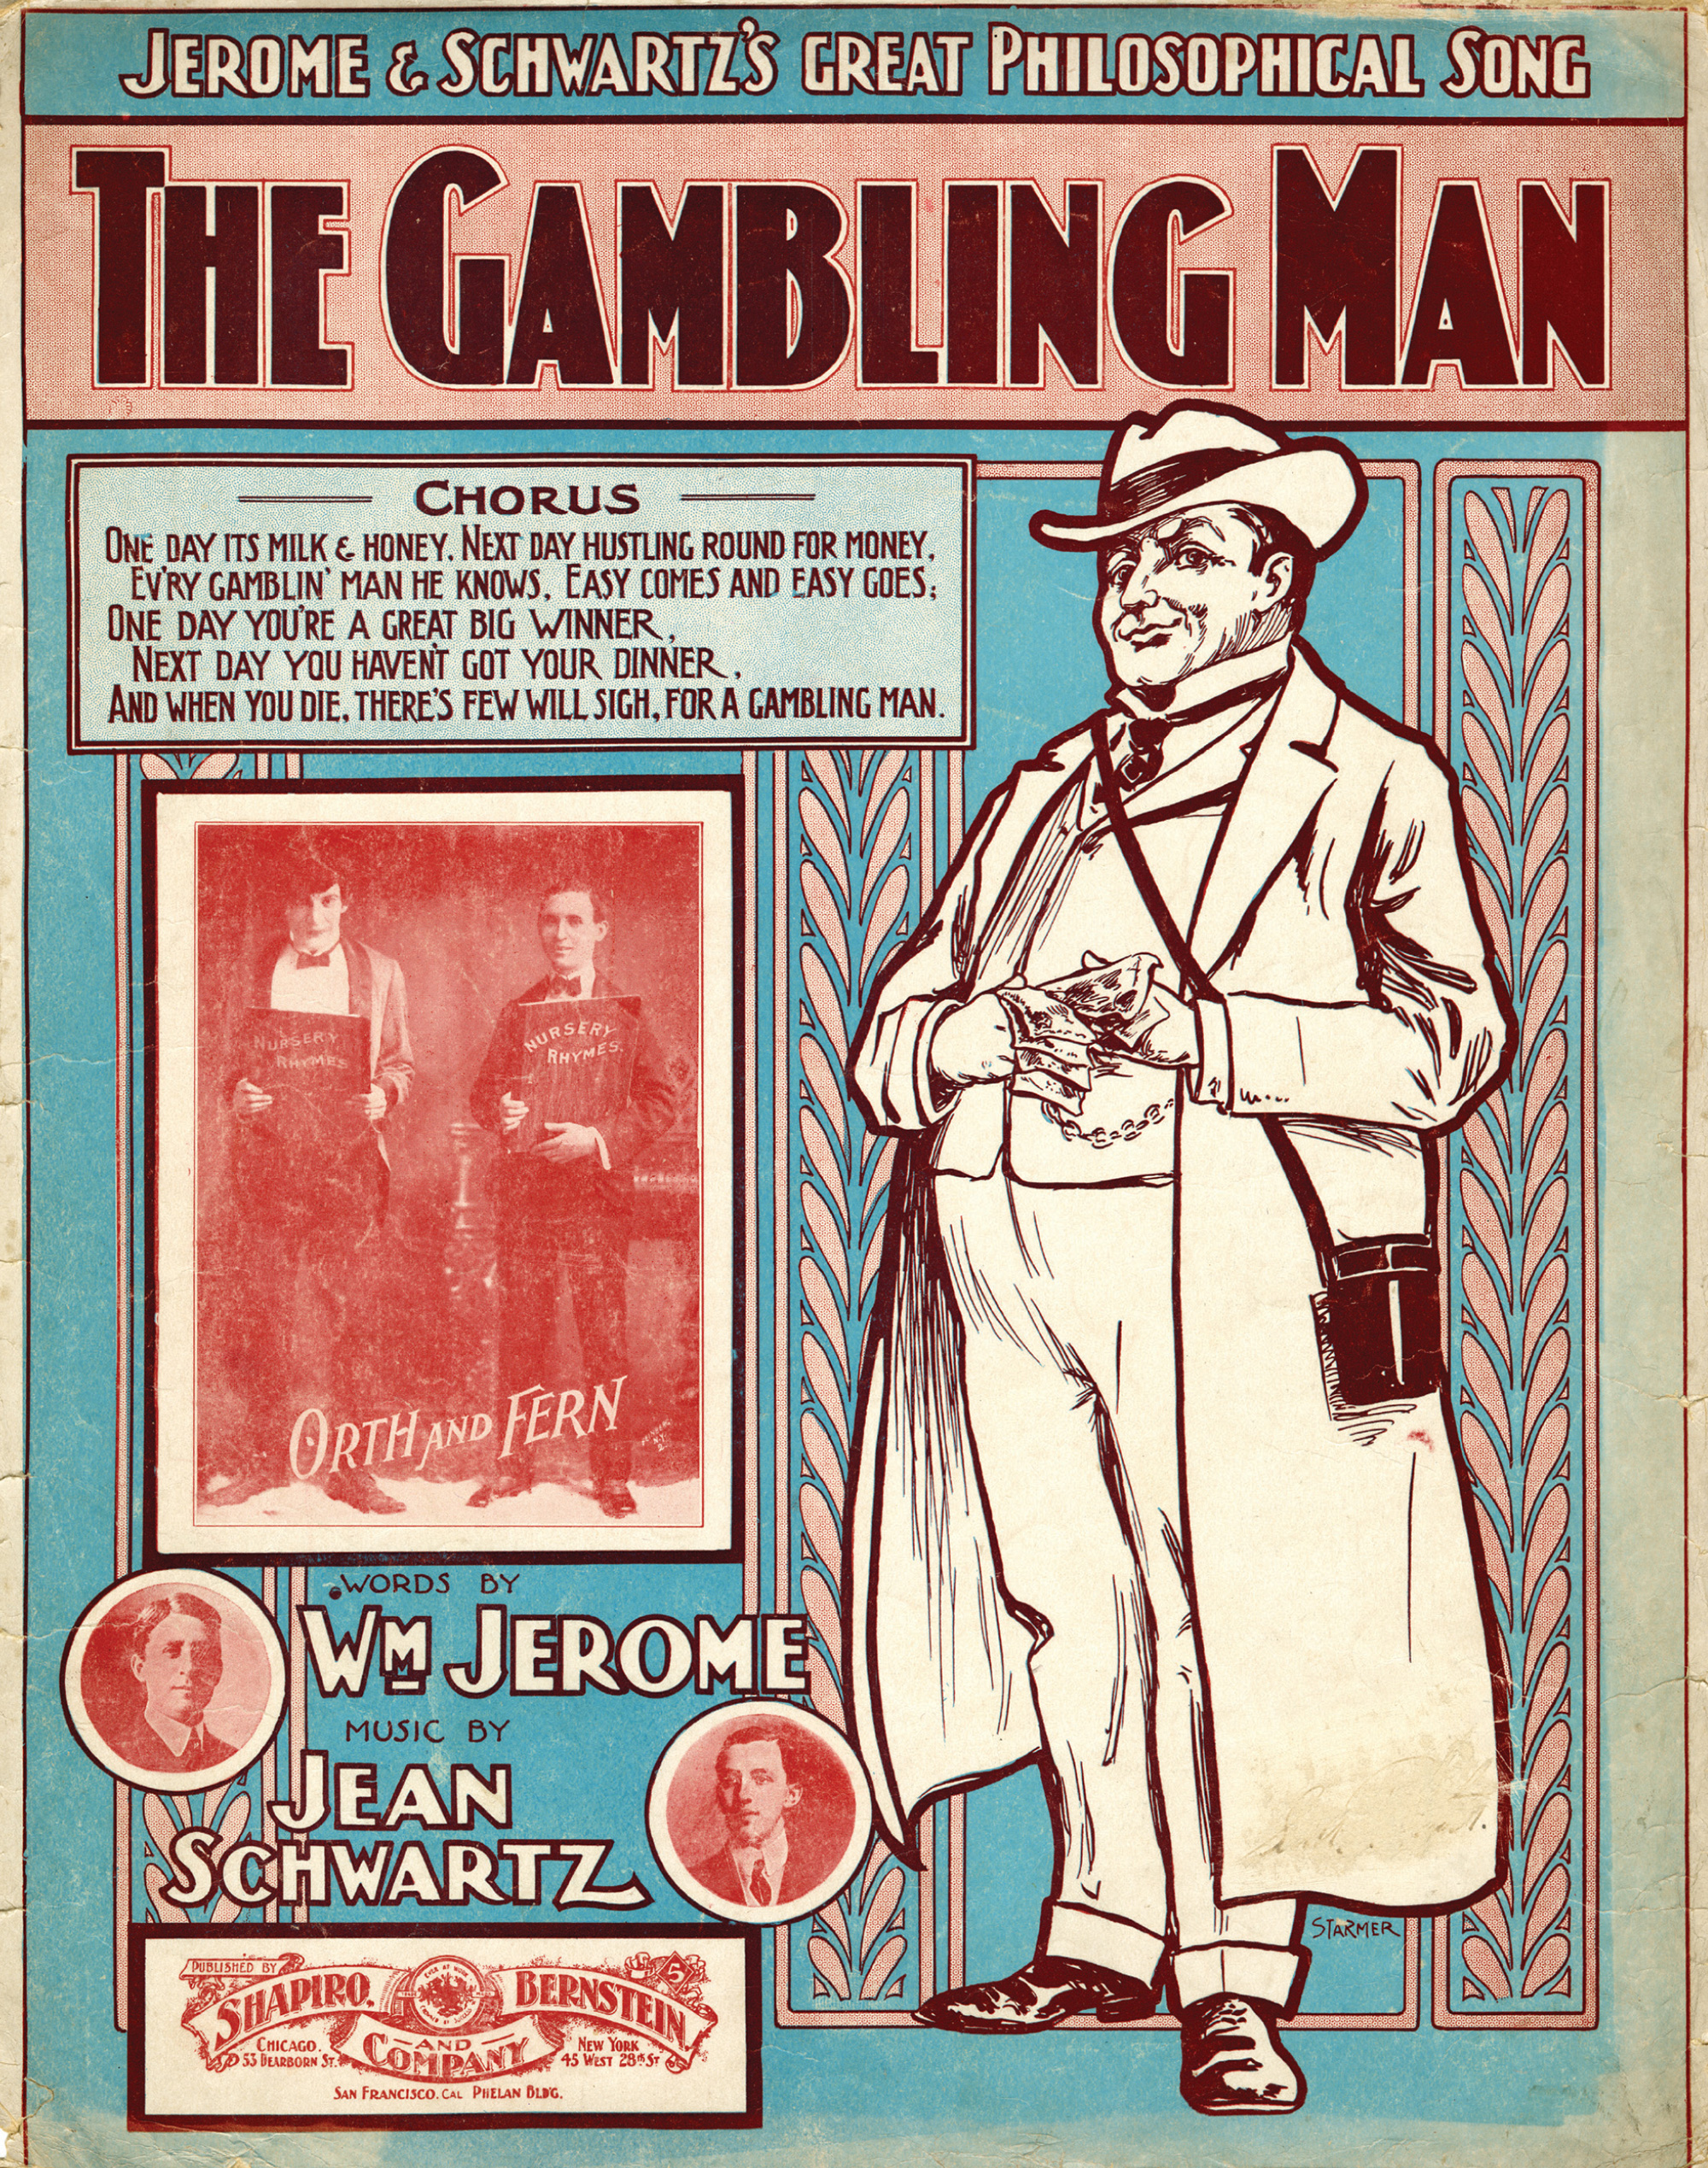 An illustrated cover from 1902 for sheet music of “The Gambling Man.”